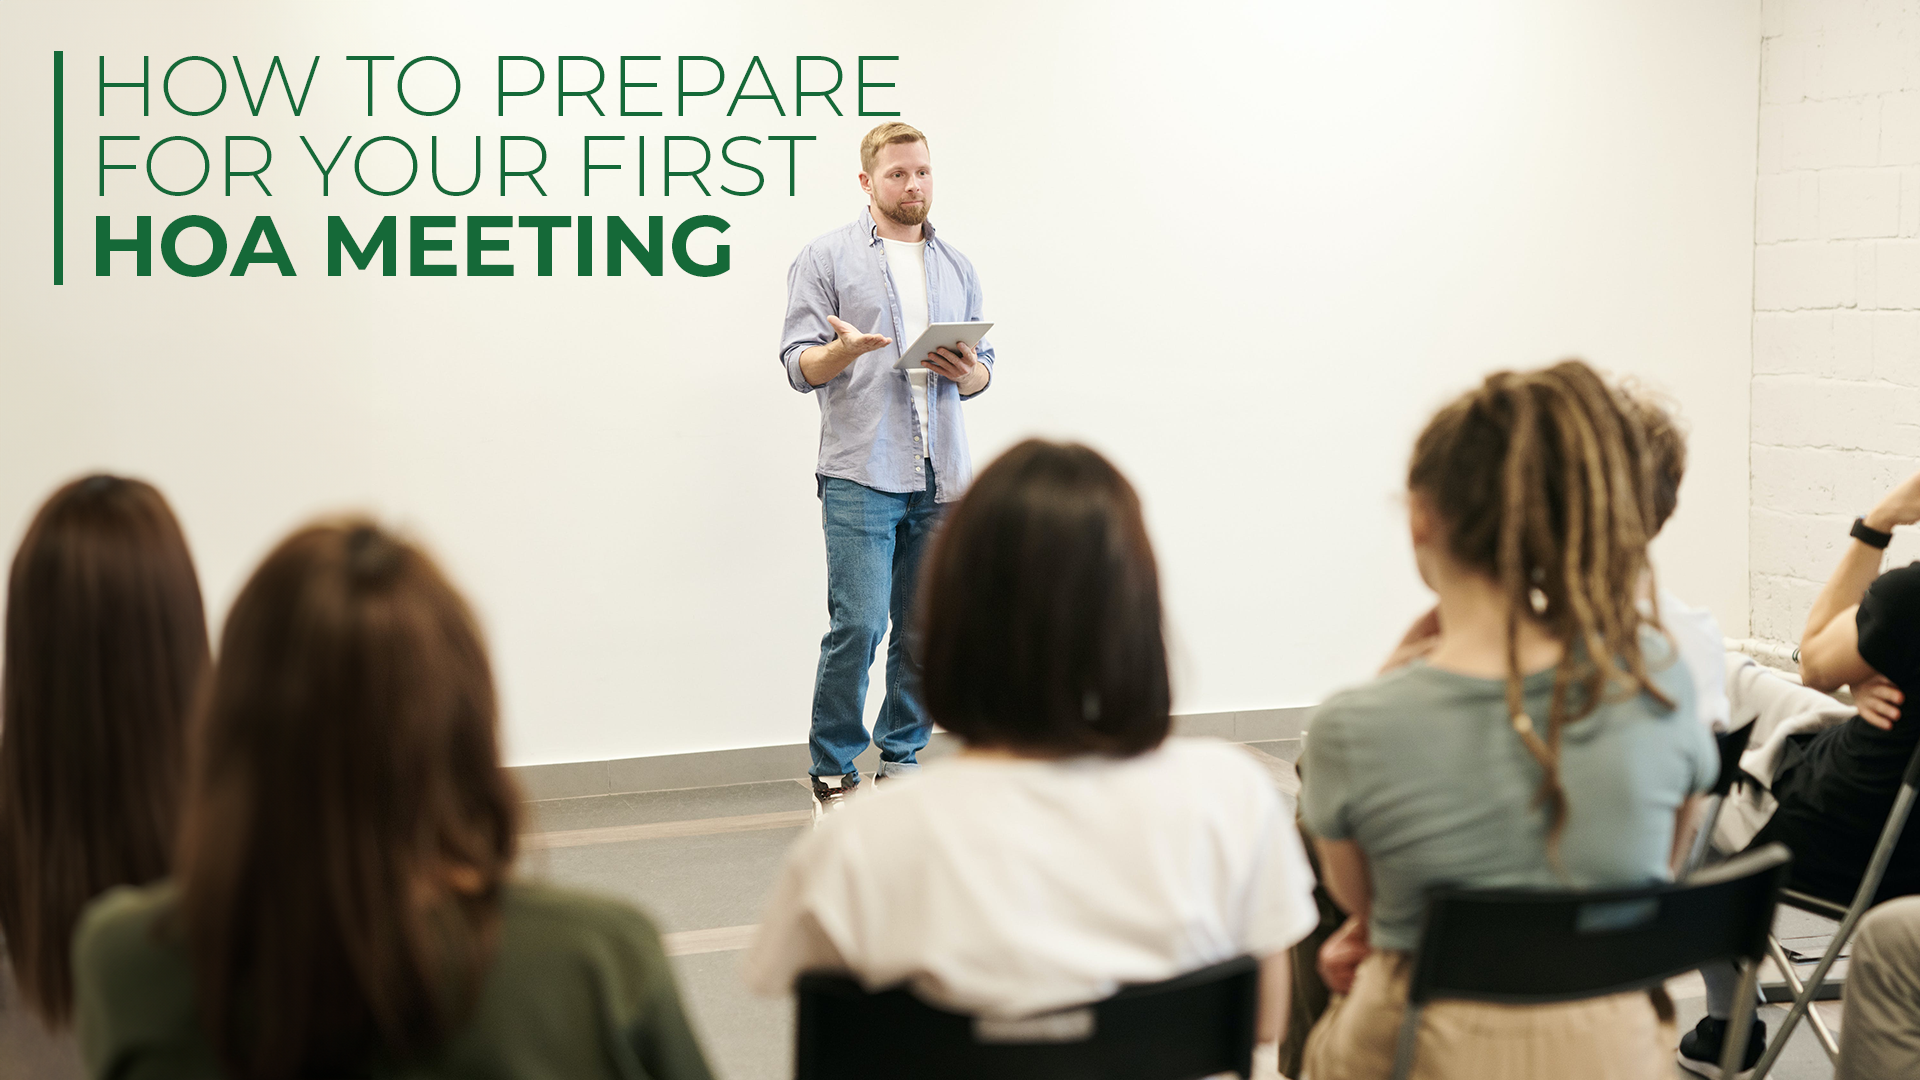 How to Prepare for Your First HOA Meeting As a Board Member